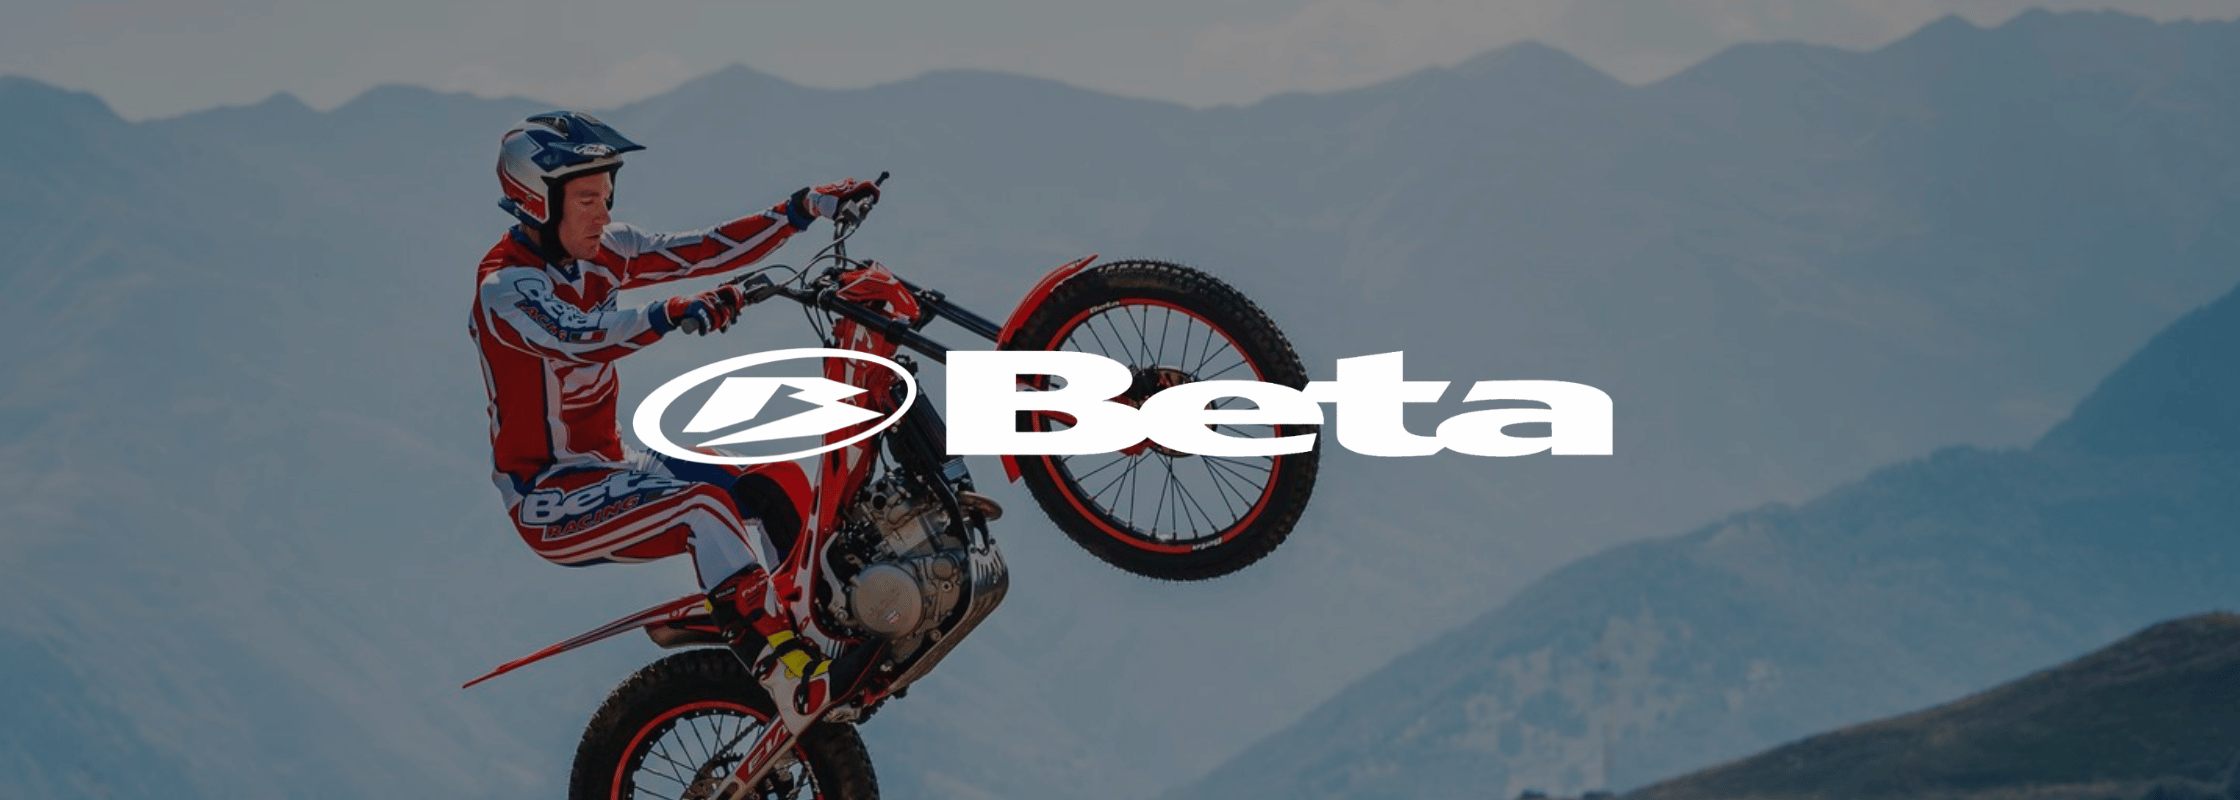 Beta Motorcycle Trials Bikes for Sale Barnsley South Yorkshire